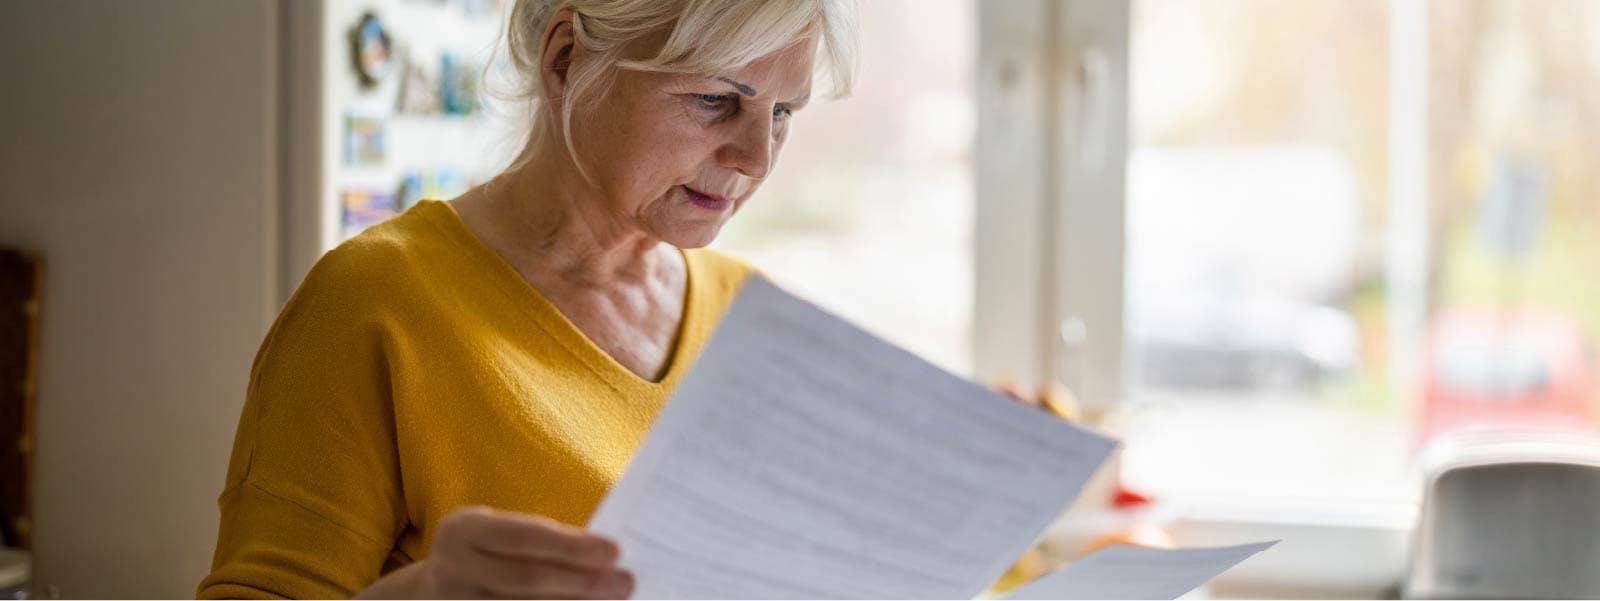 A woman examining documents to check for potential Medicare scams.